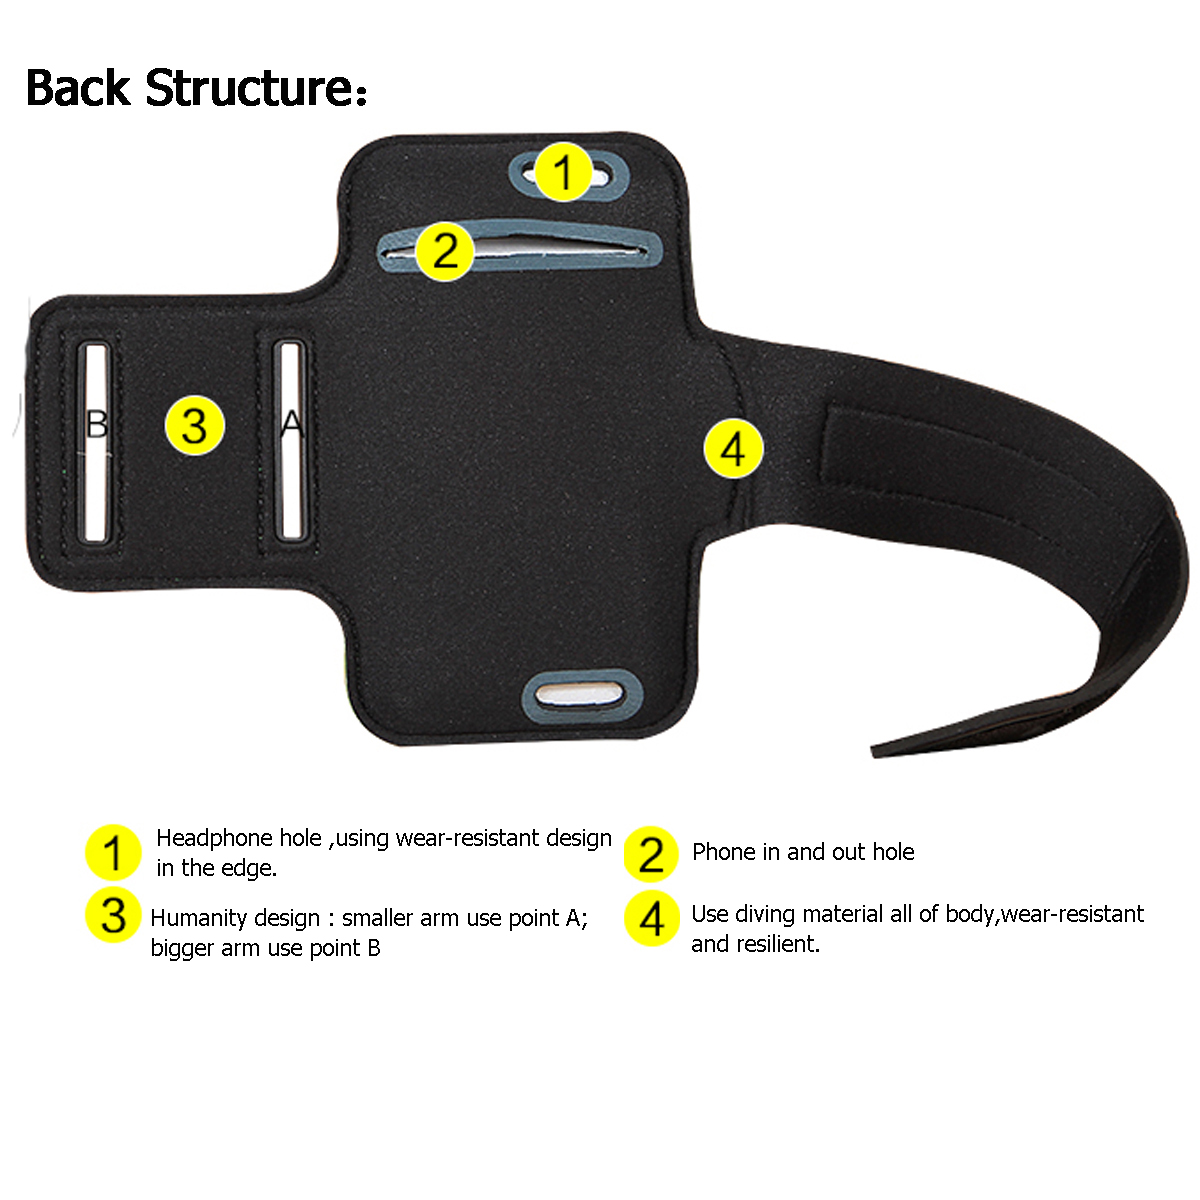 Universal-Sports-Elastic-Armband-Sweatproof-Touch-Screen-Mobile-Phone-Arm-Bags-with-Earphone-Port-fo-1890480-4